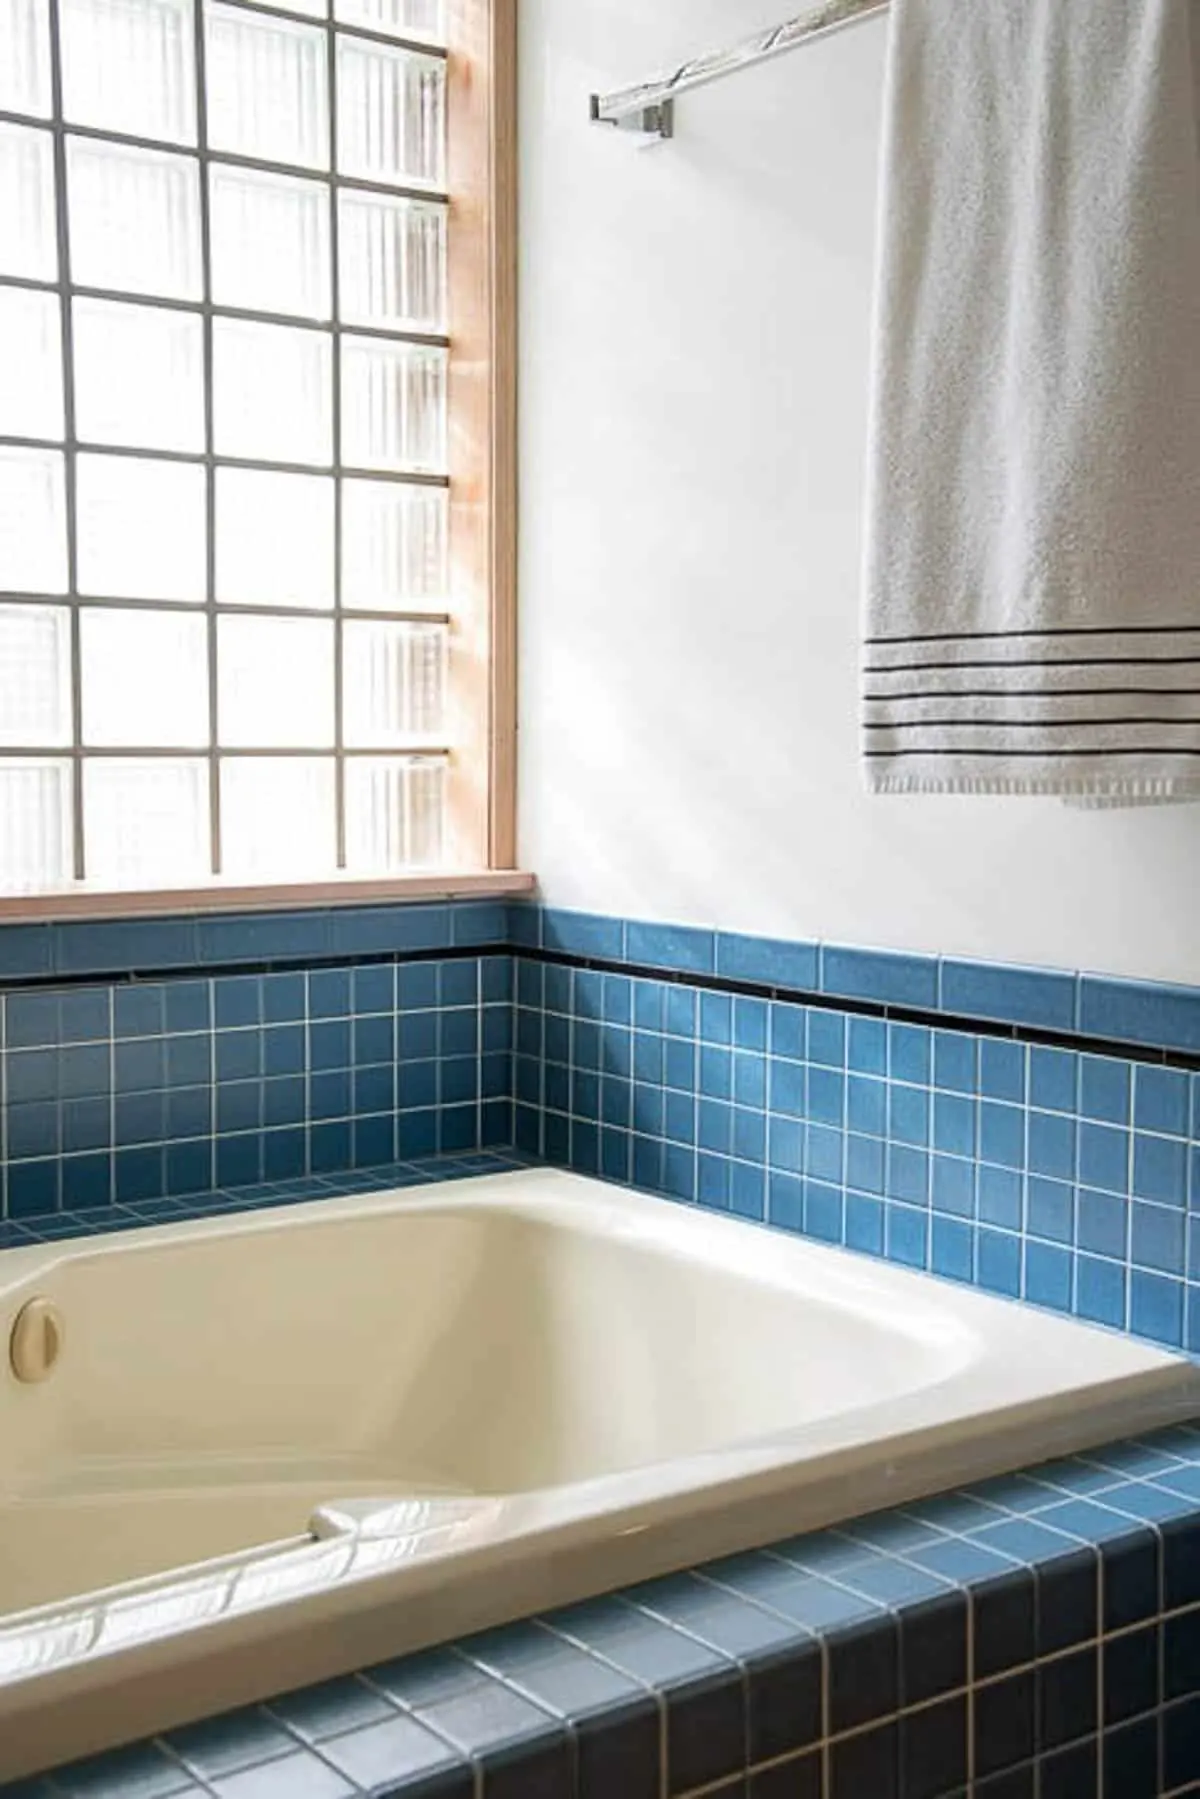 Almond bathtub with blue tile walls and glass block window